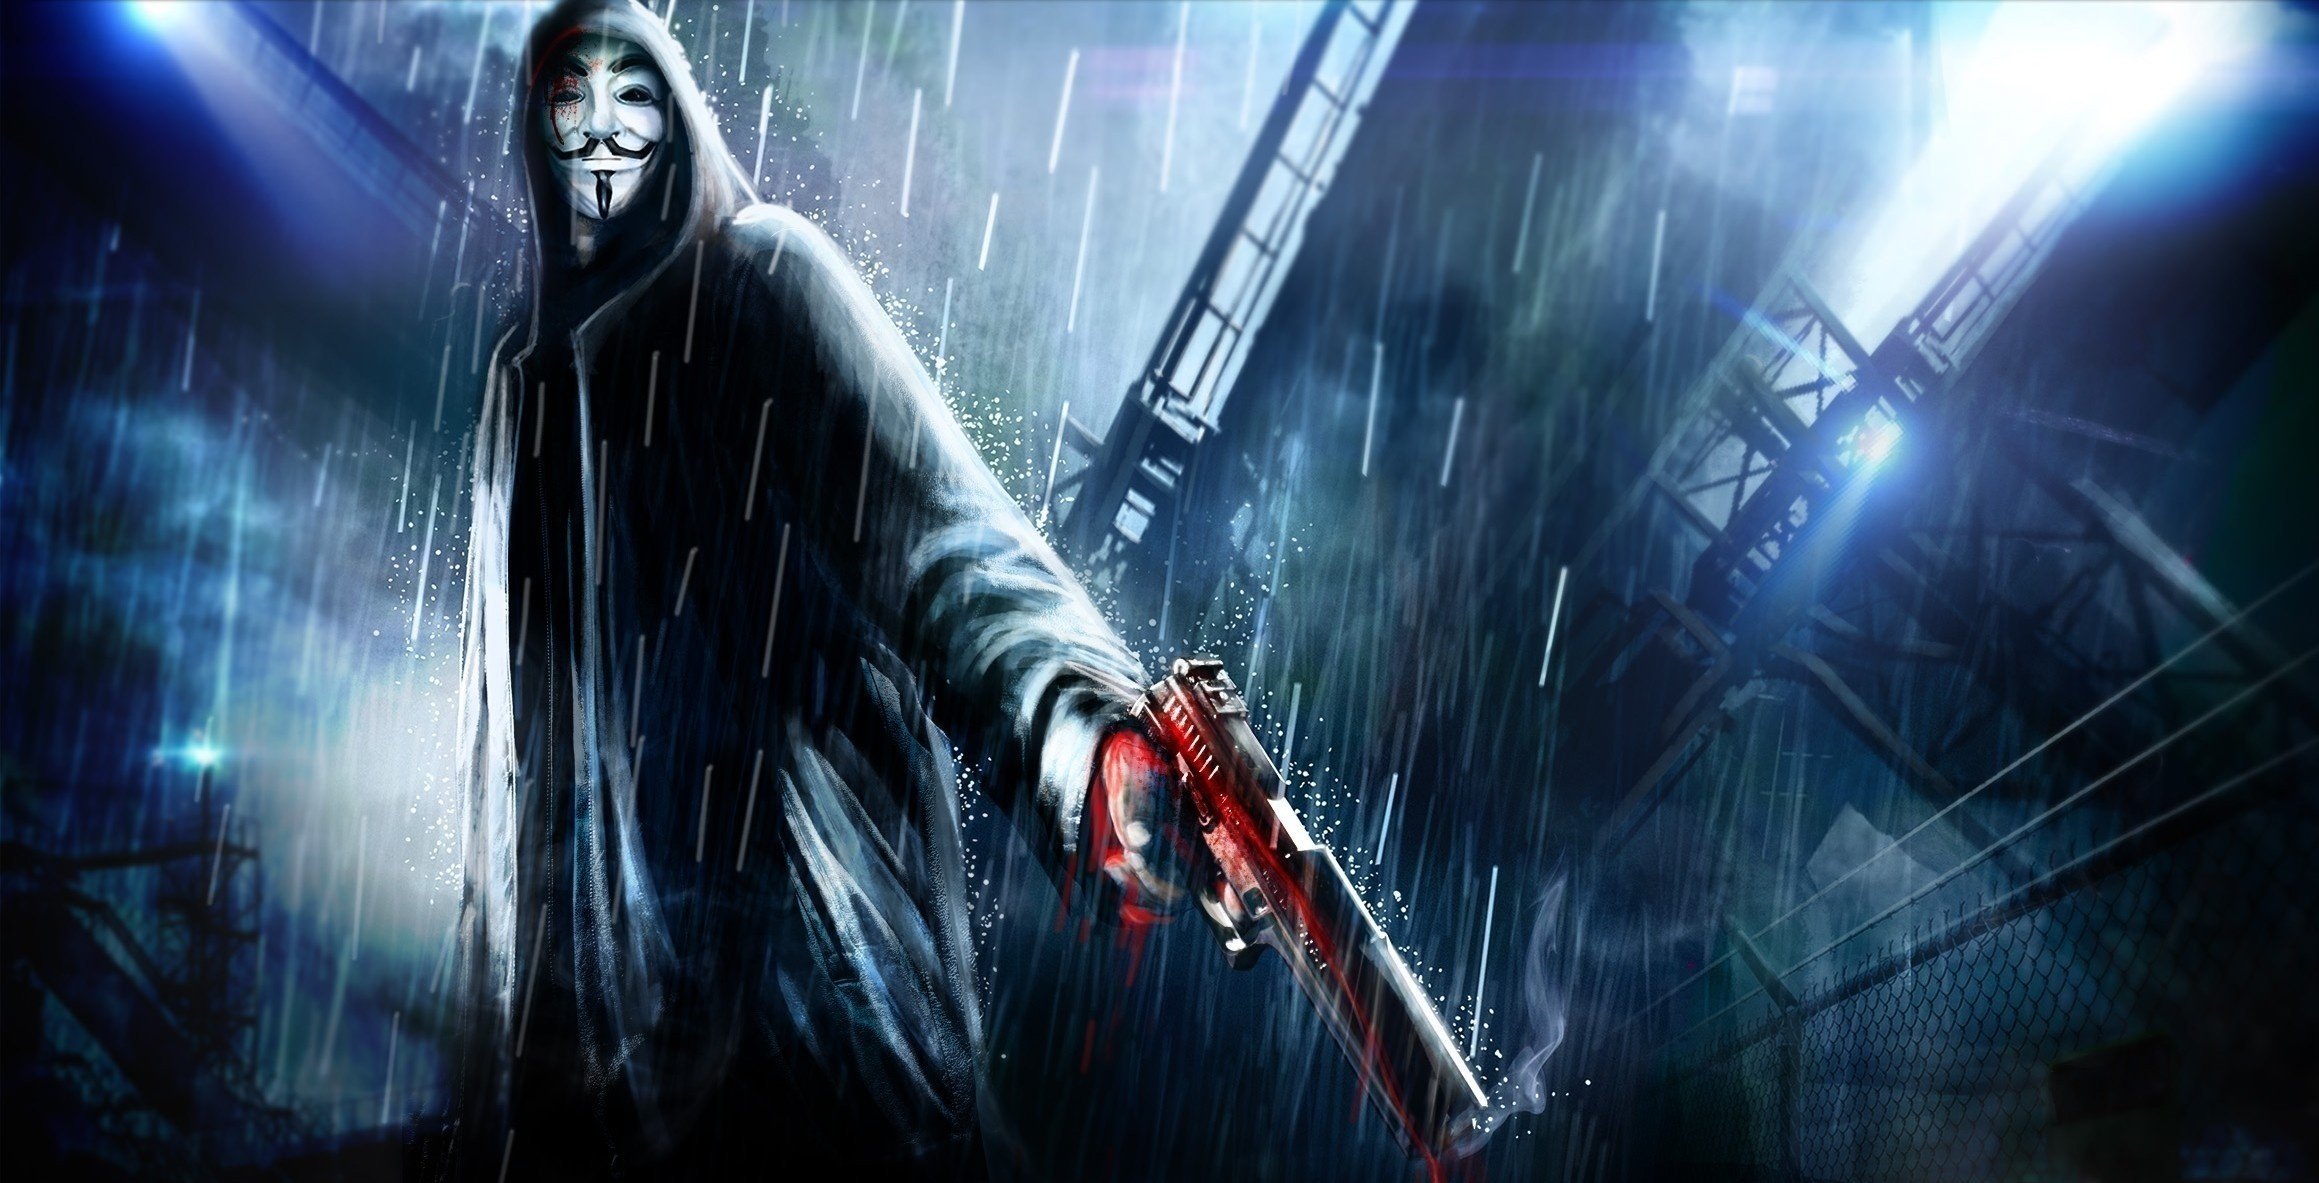 hacker hack hacking internet computer anarchy poster anonymous wallpapers hd desktop and mobile backgrounds hacker hack hacking internet